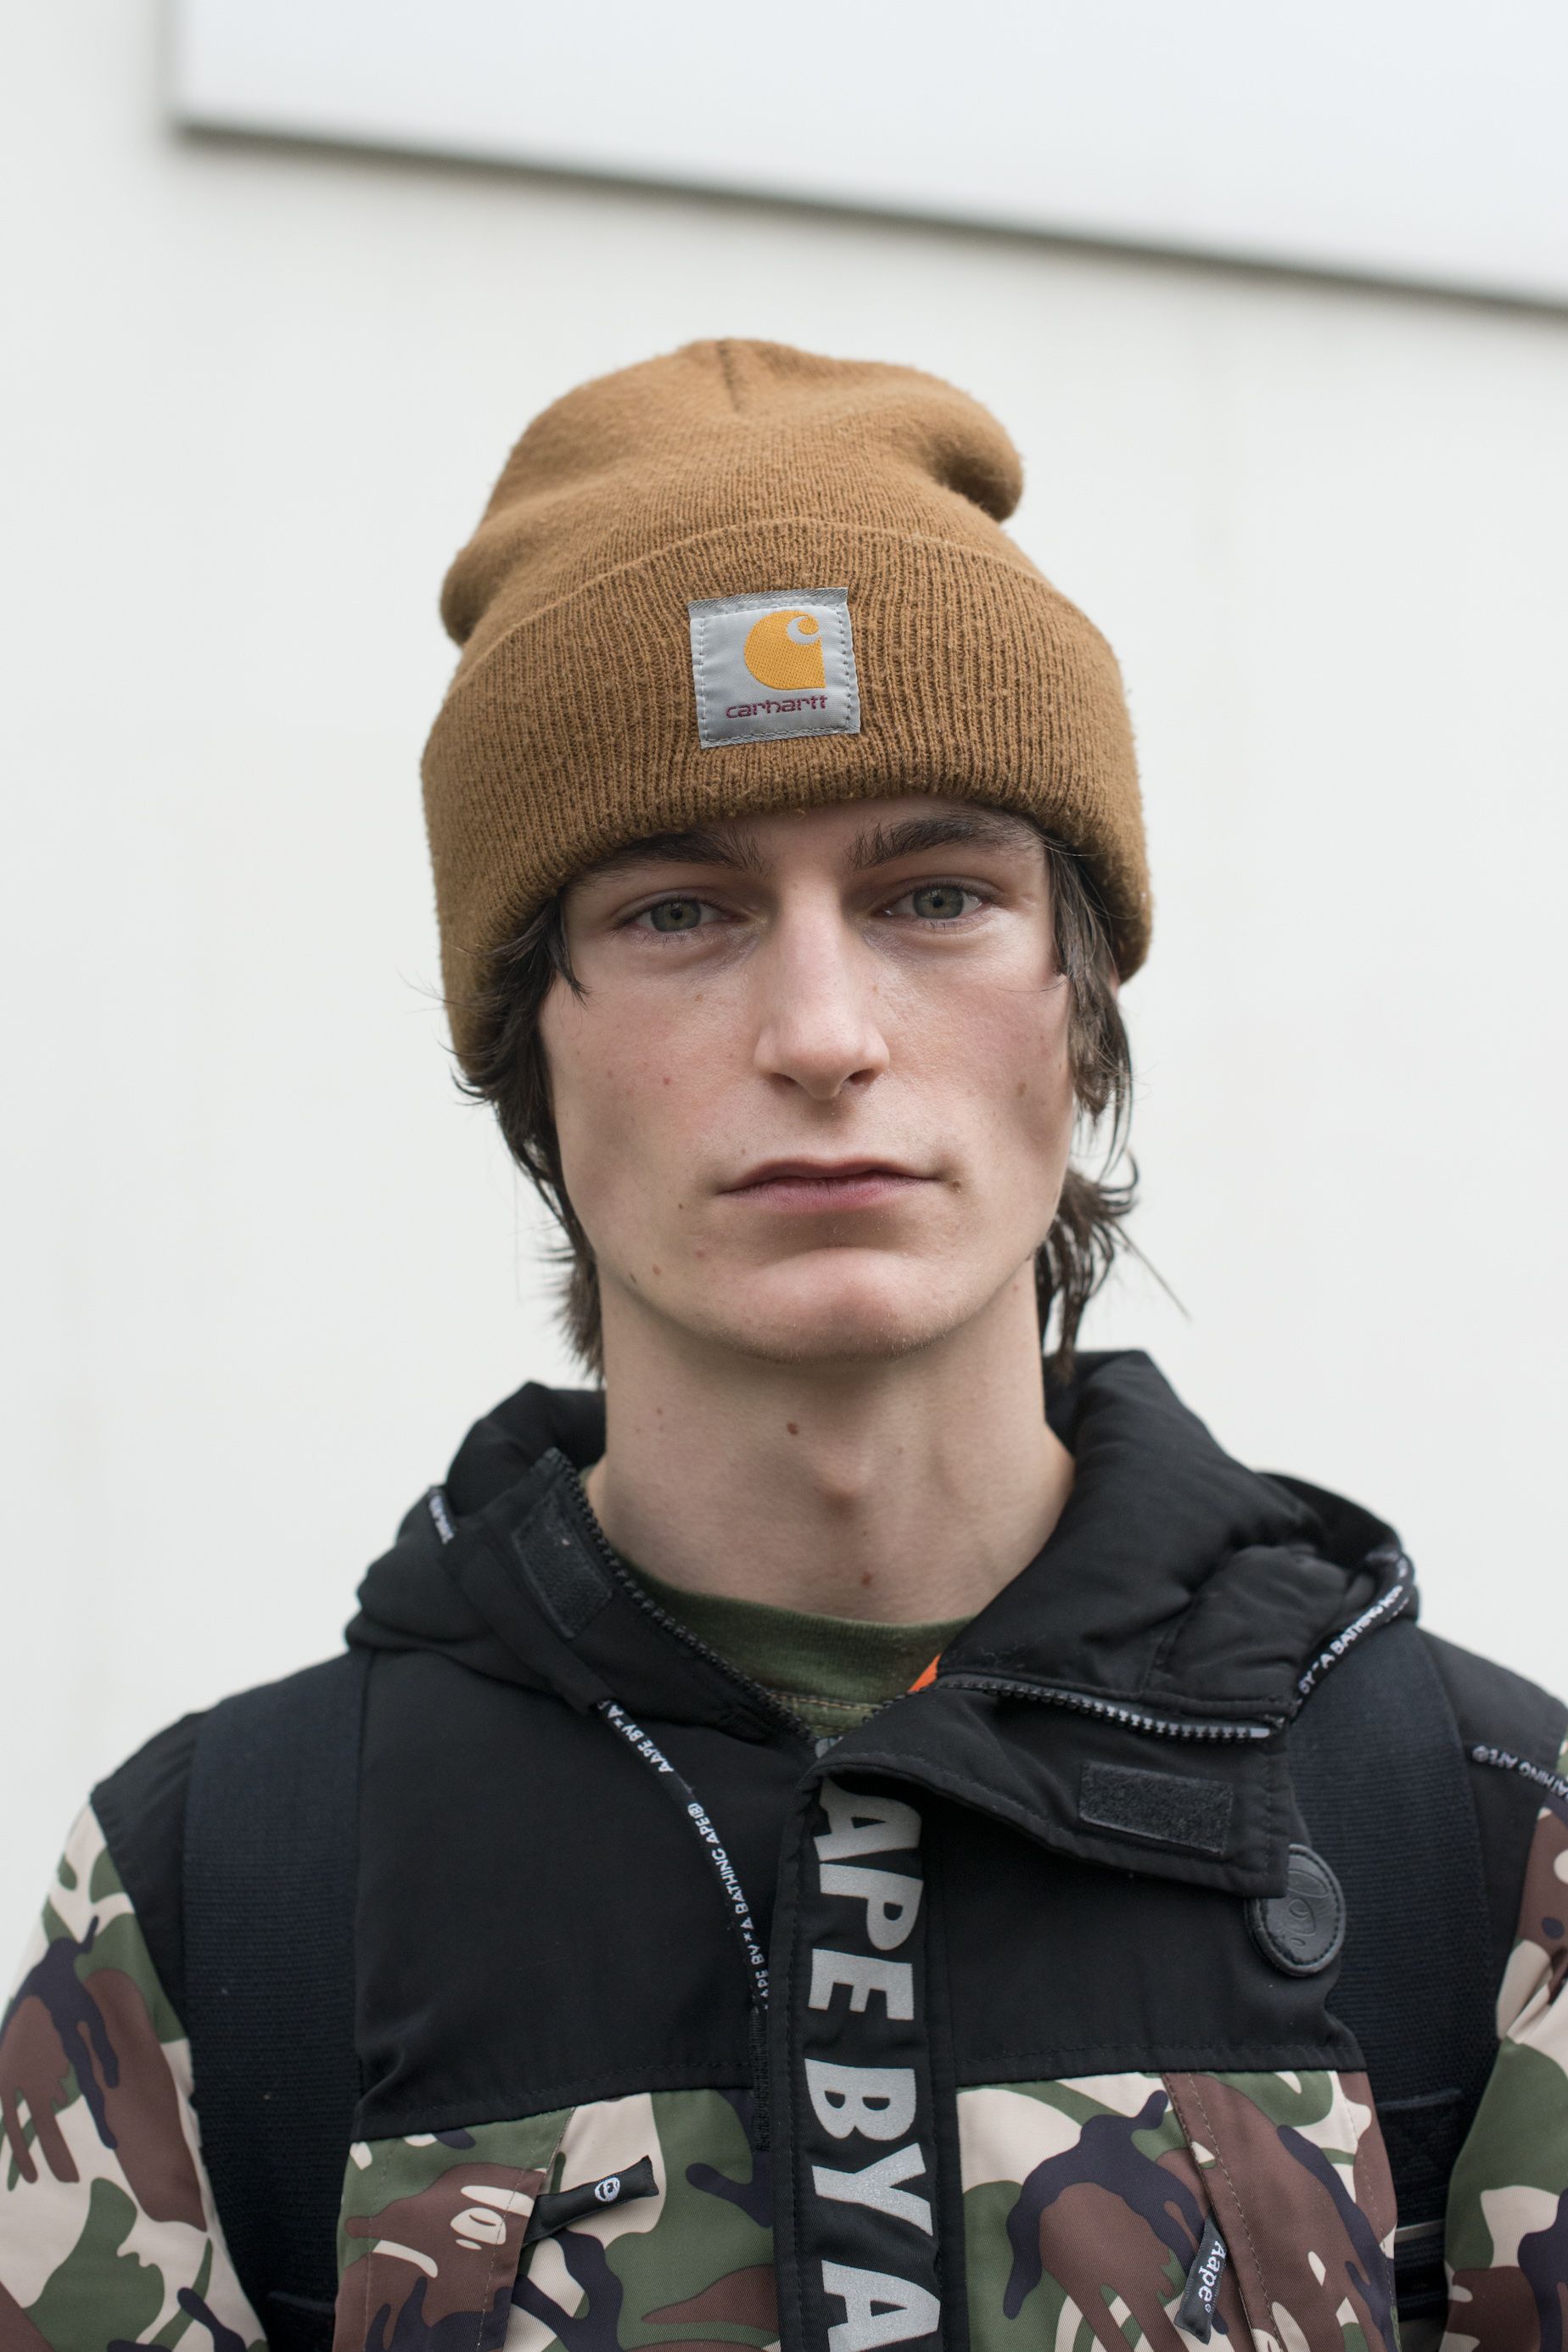 Somatisk celle Inde I hele verden Carhartt's Most Popular Product Is This Basic Beanie